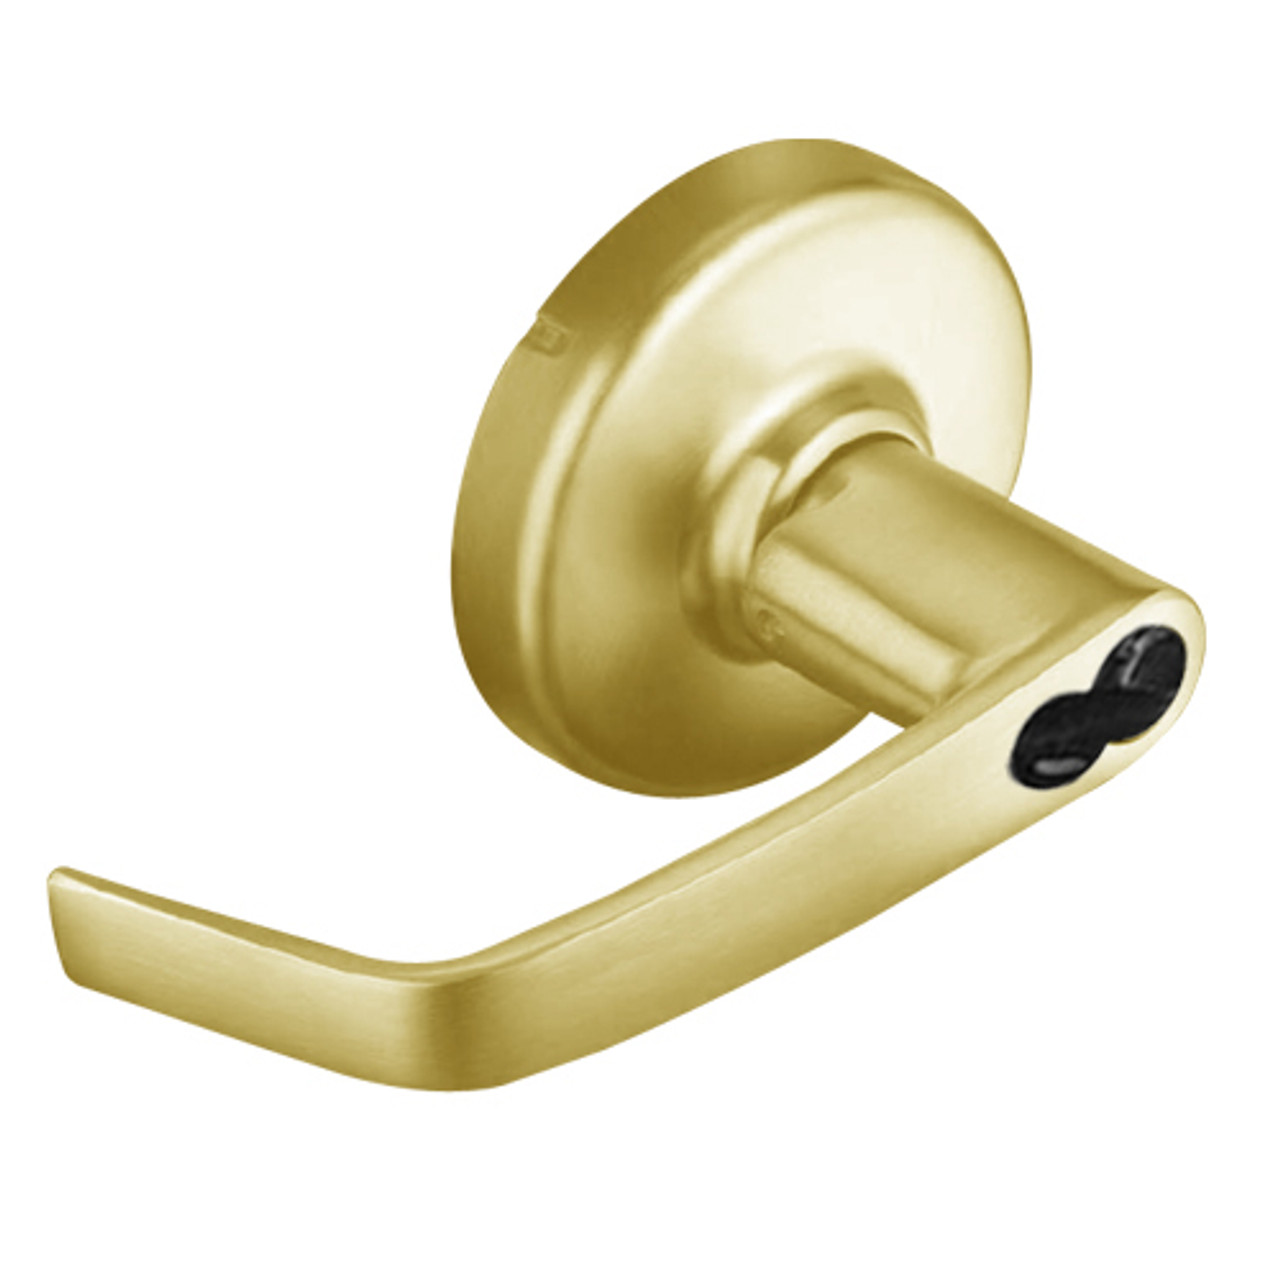 CL3161-NZD-605-CL6 Corbin CL3100 Series Vandal Resistant 6-Pin Less IC Core Entrance Cylindrical Locksets with Newport Lever in Bright Brass Finish